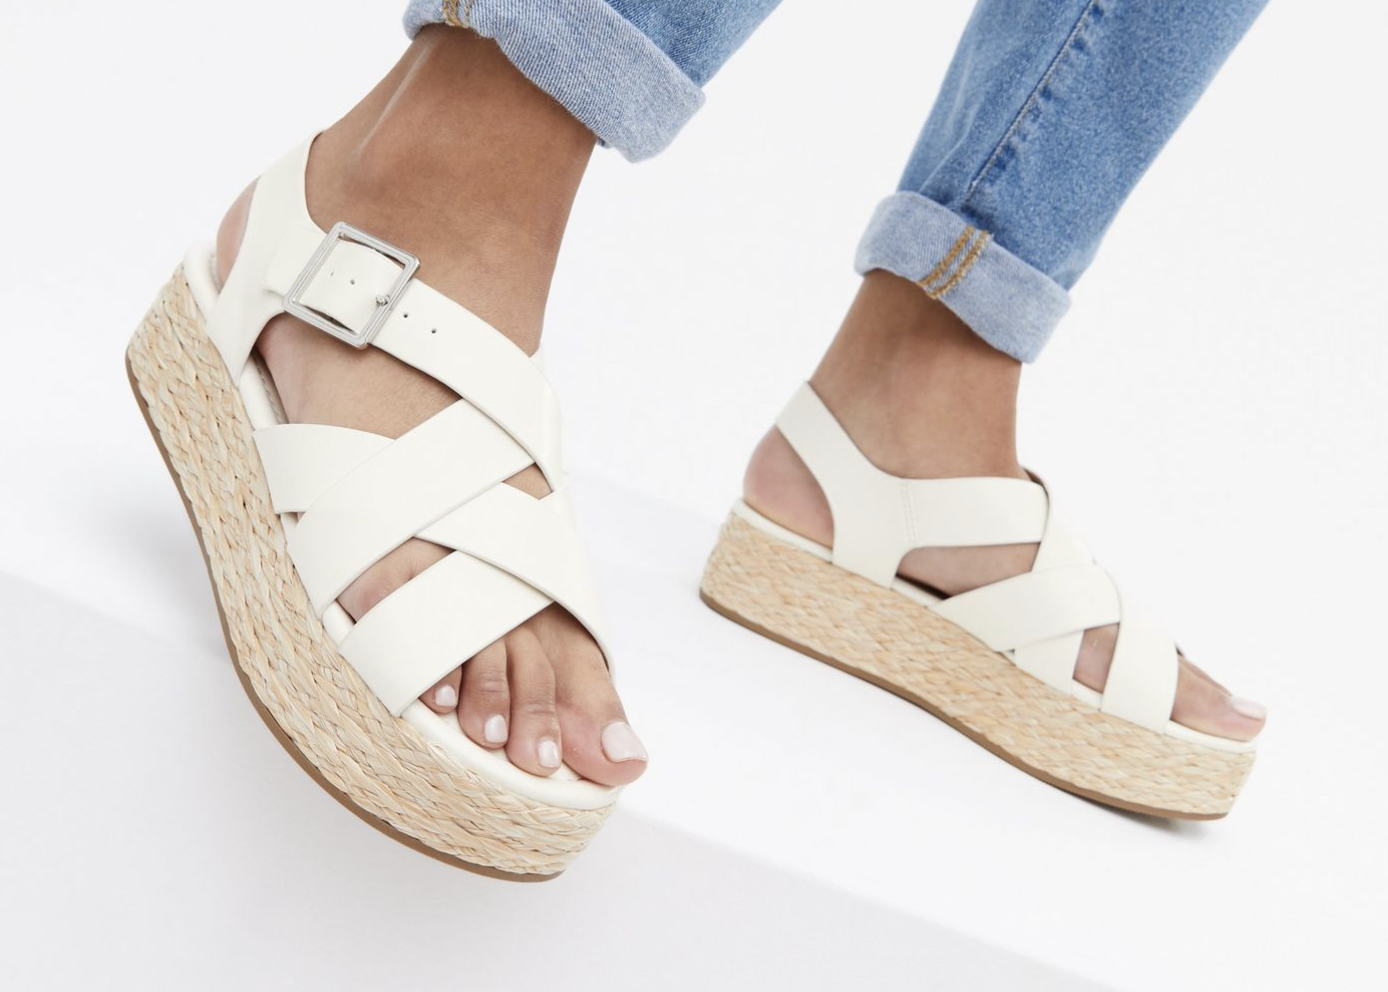 Get Your Hands On These Cute And Comfy Sandals For Summer